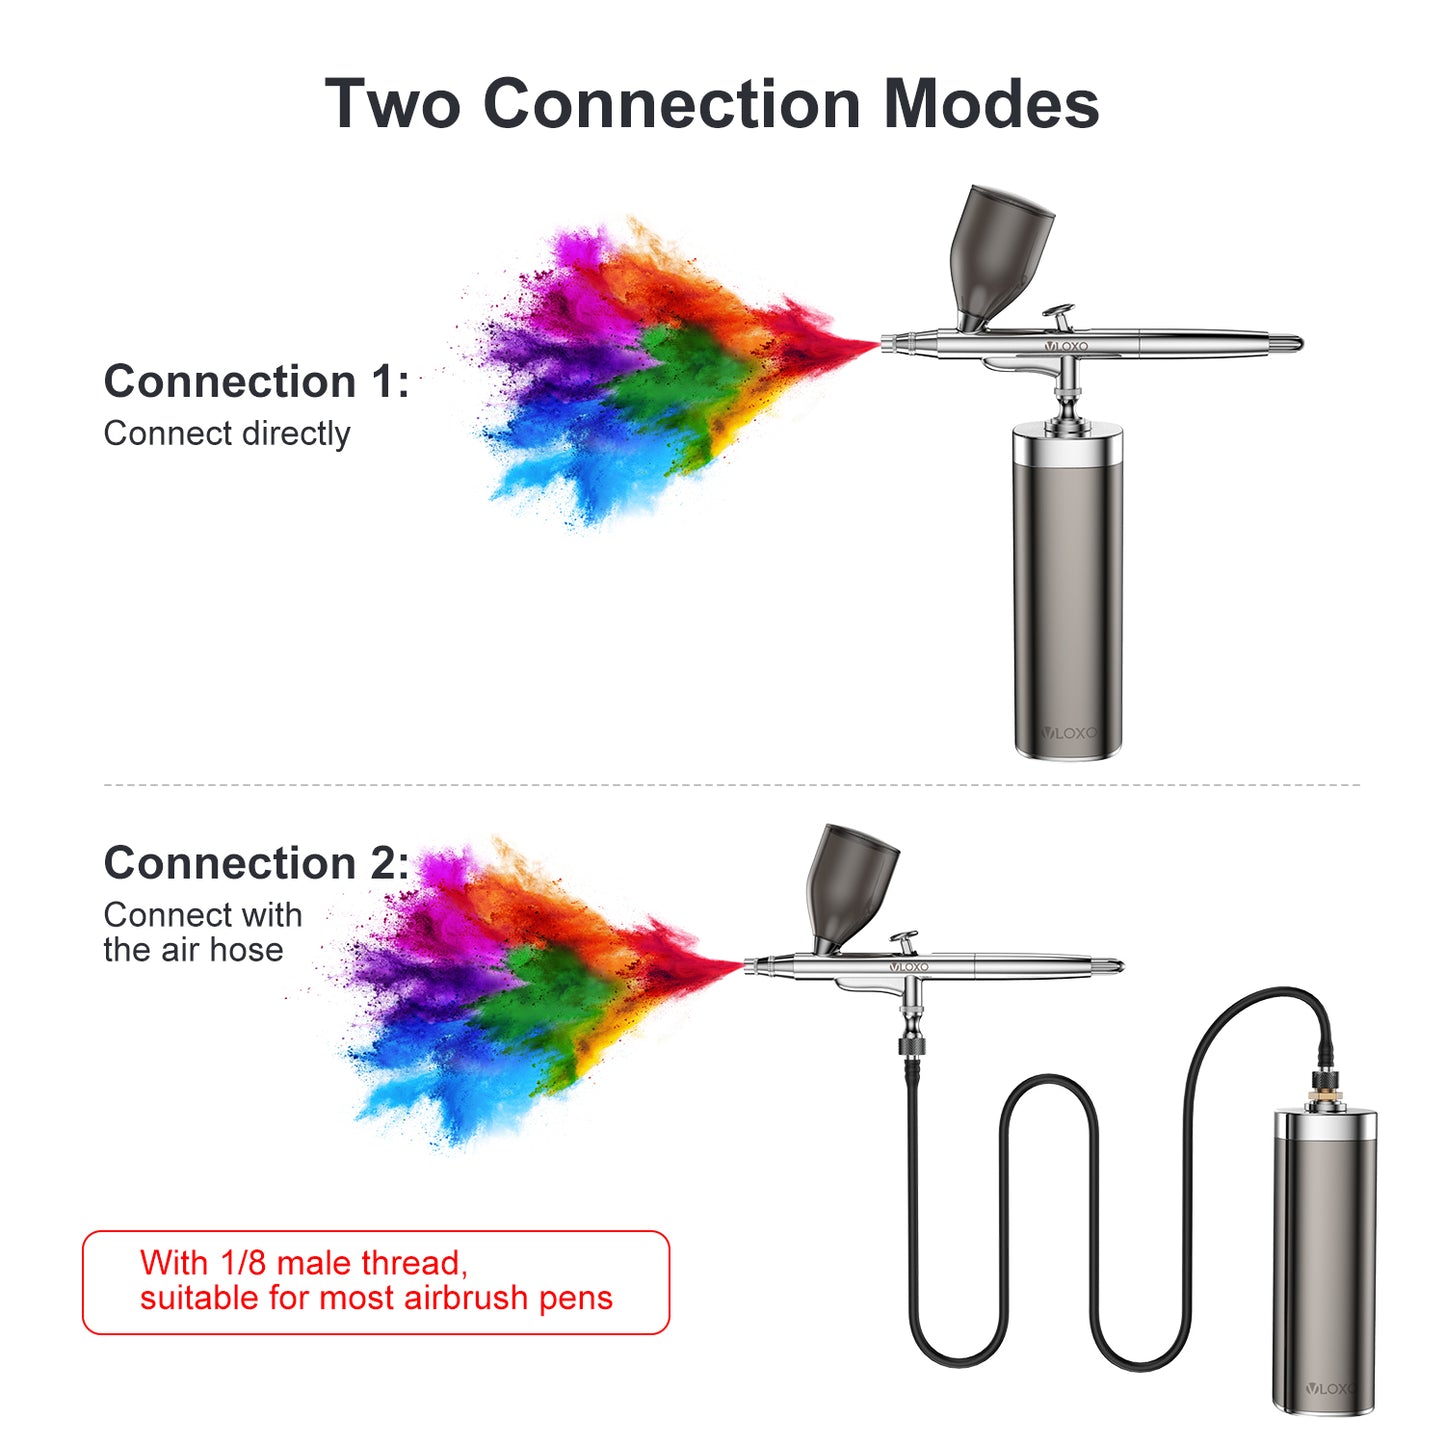 VLOXO Cordless 32PSI Upgraded Airbrush Kit with Compressor Dual-action Airbrush Kit for Painting, Model Coloring, Craft Art